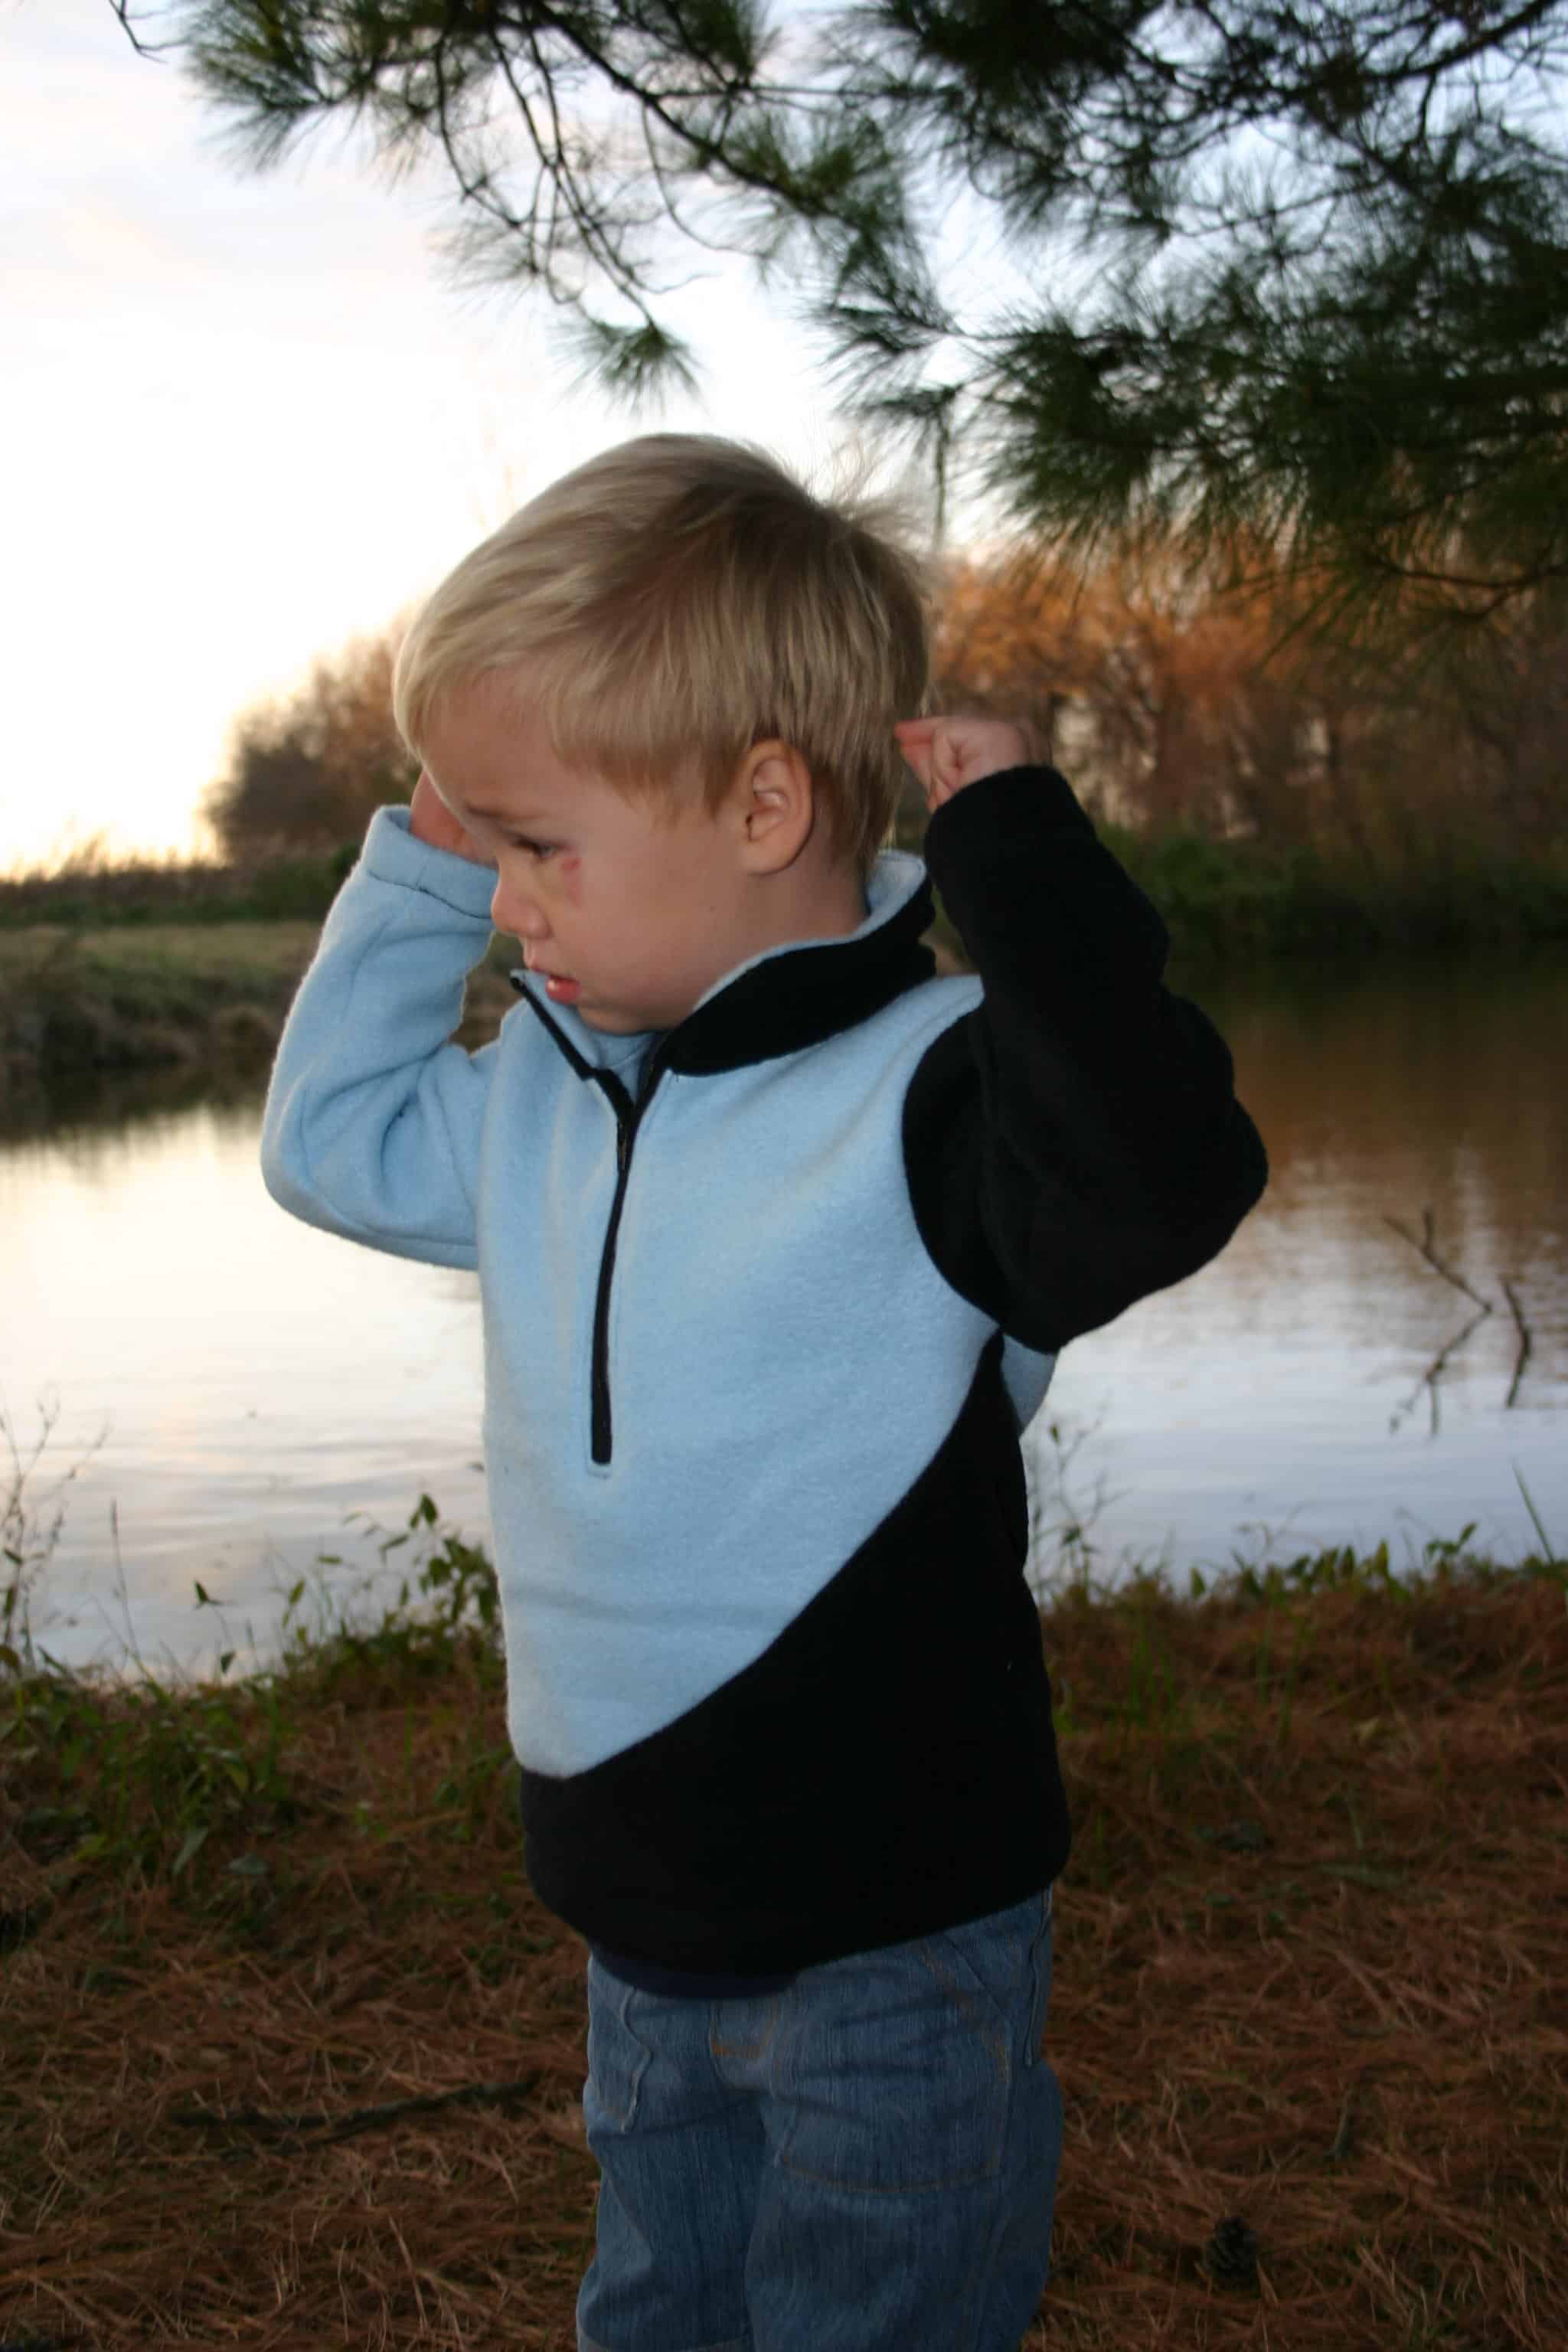 Kids' K2 Fleece Pullover - 5 out of 4 Patterns